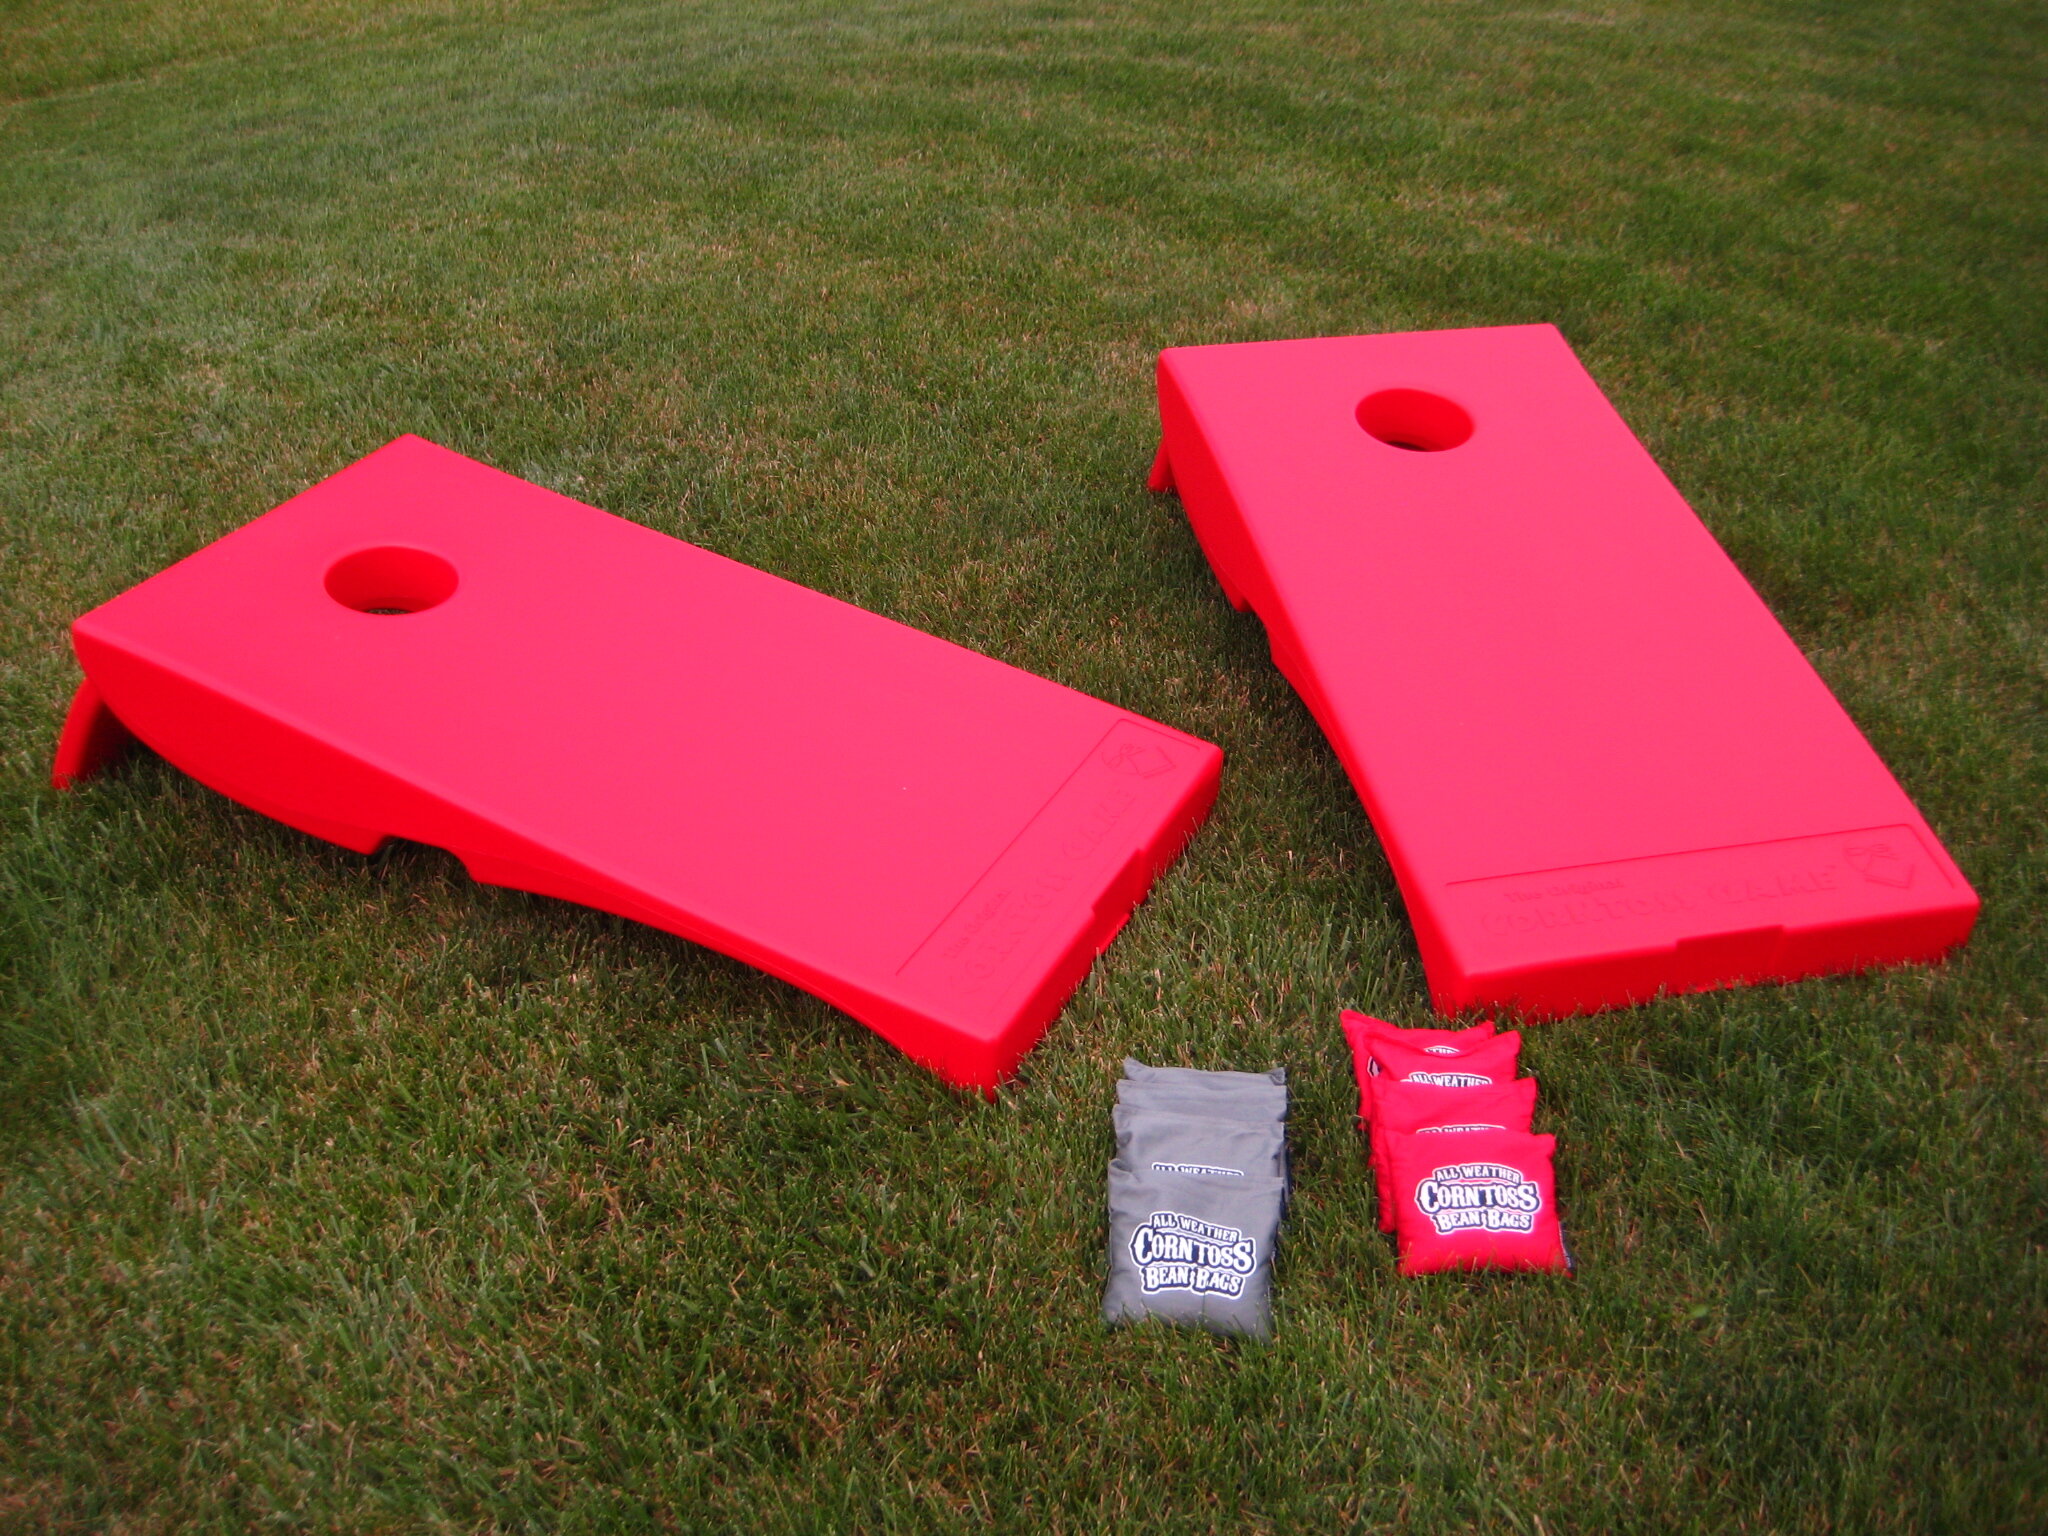 Driveway Games All Weather Cornhole Set Regulation Corn Toss Boards /& Bean Bags Family Outdoor Lawn Yard Game